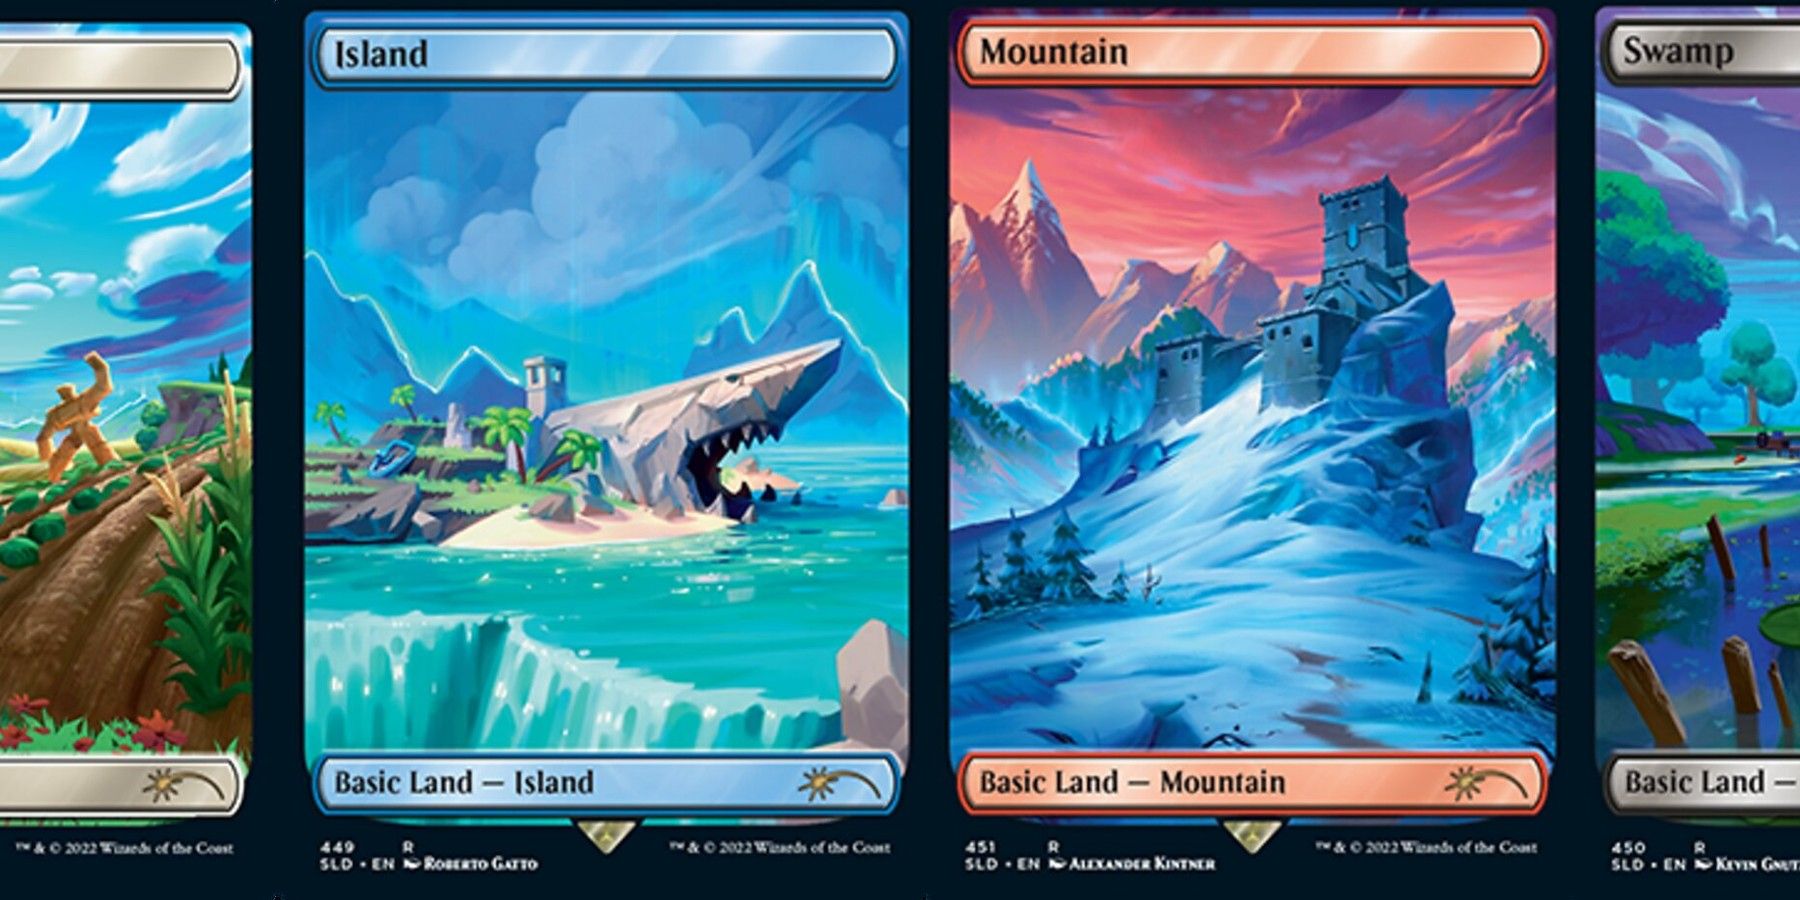 The Fortnite art for the Secret Lair cards is vibrant and pleasant to look at.